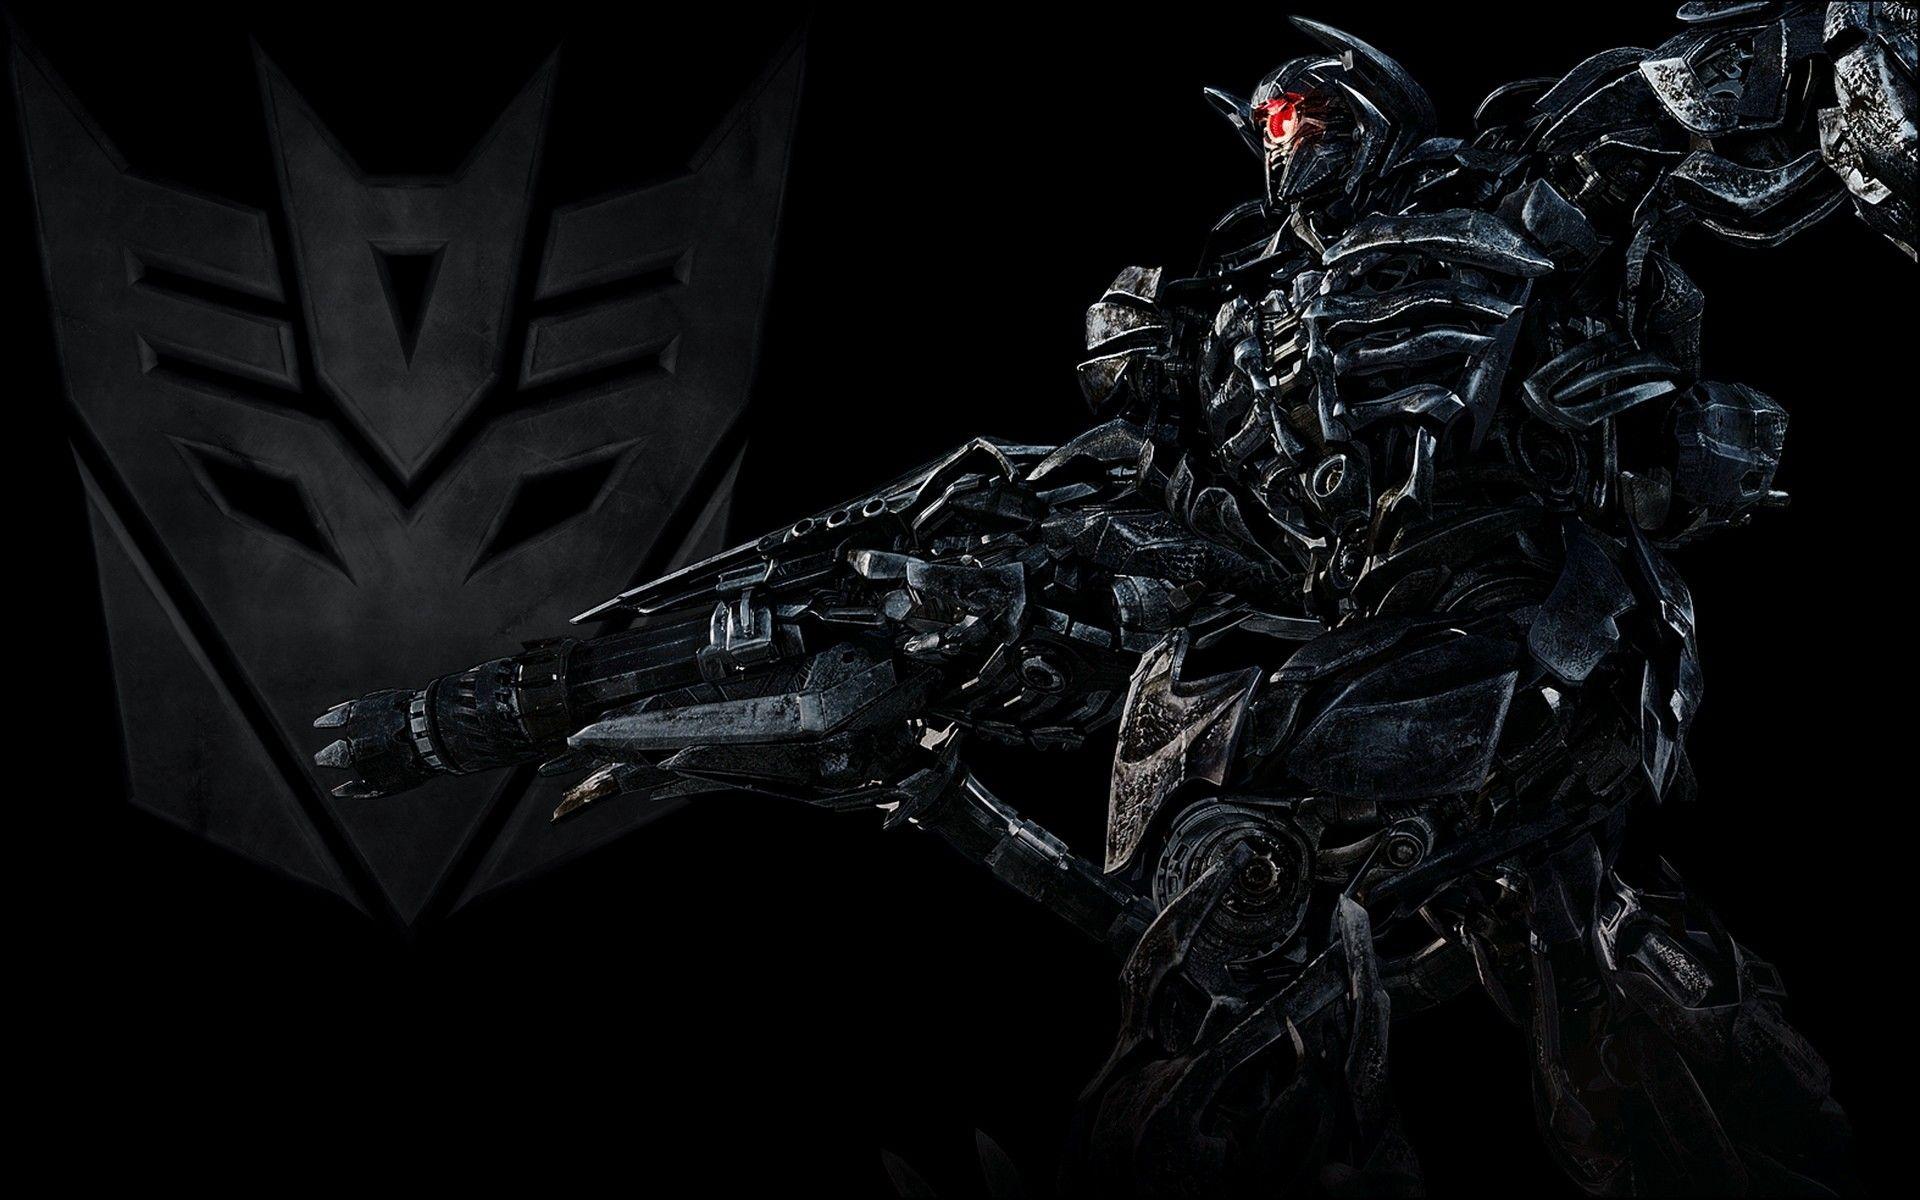 Creative Decepticon Wallpaper in High Quality, Fraser Blench